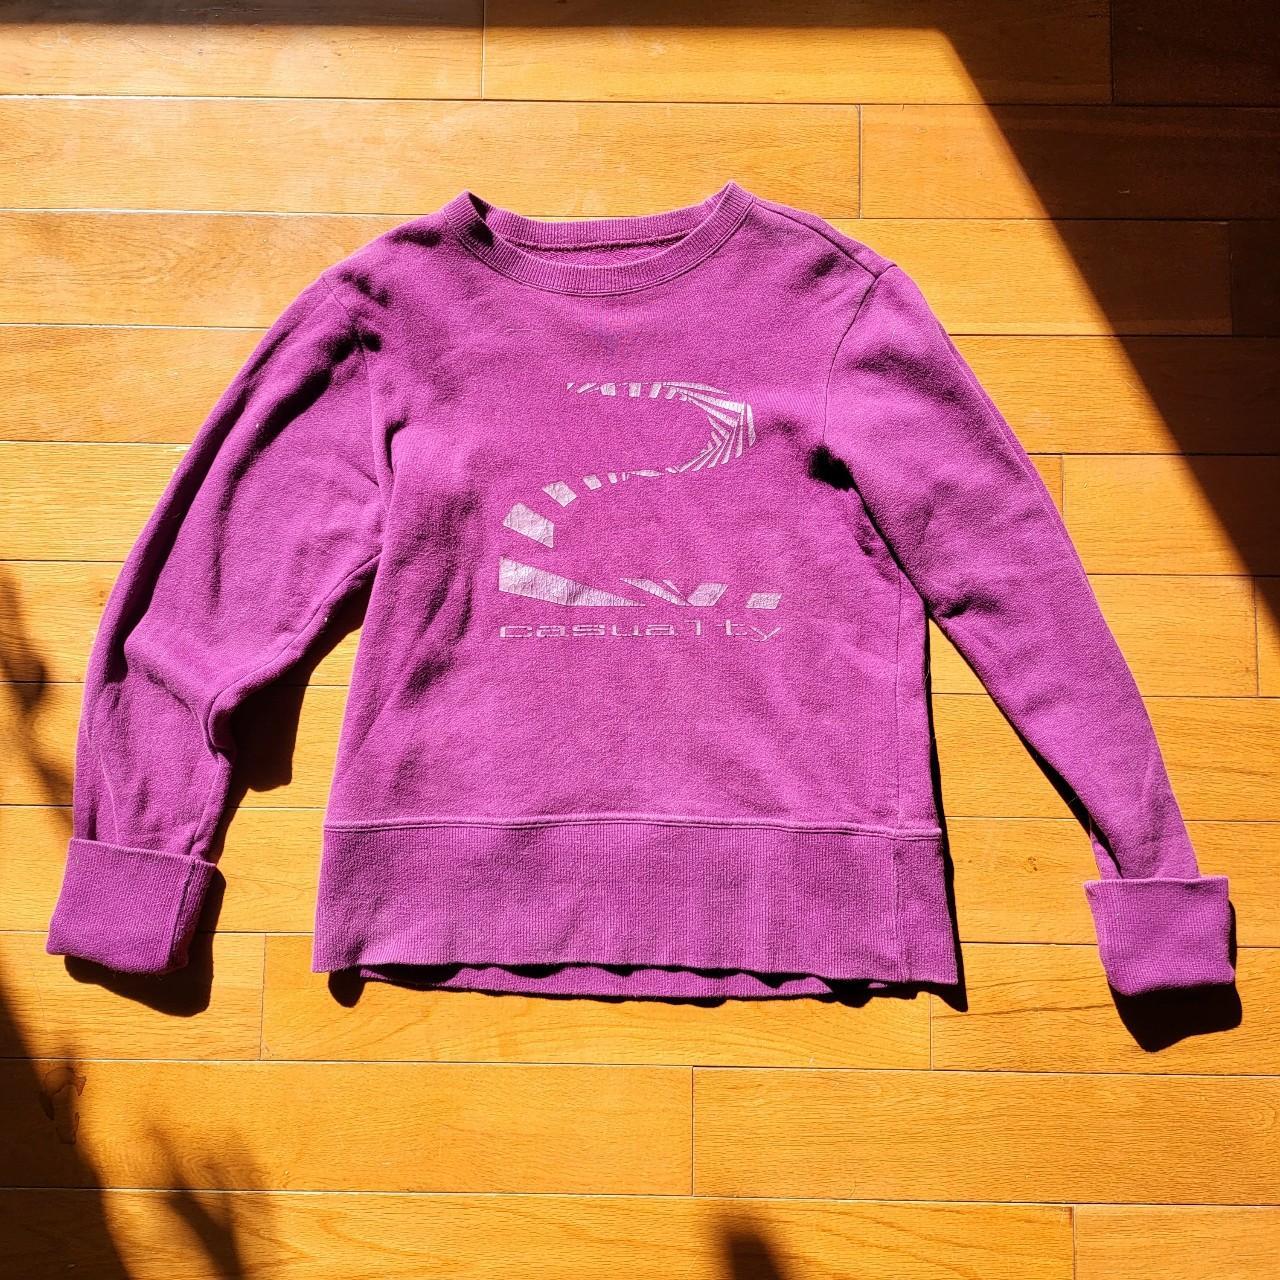 Product Image 1 - purple beauty:beast pullover sweater

fading to